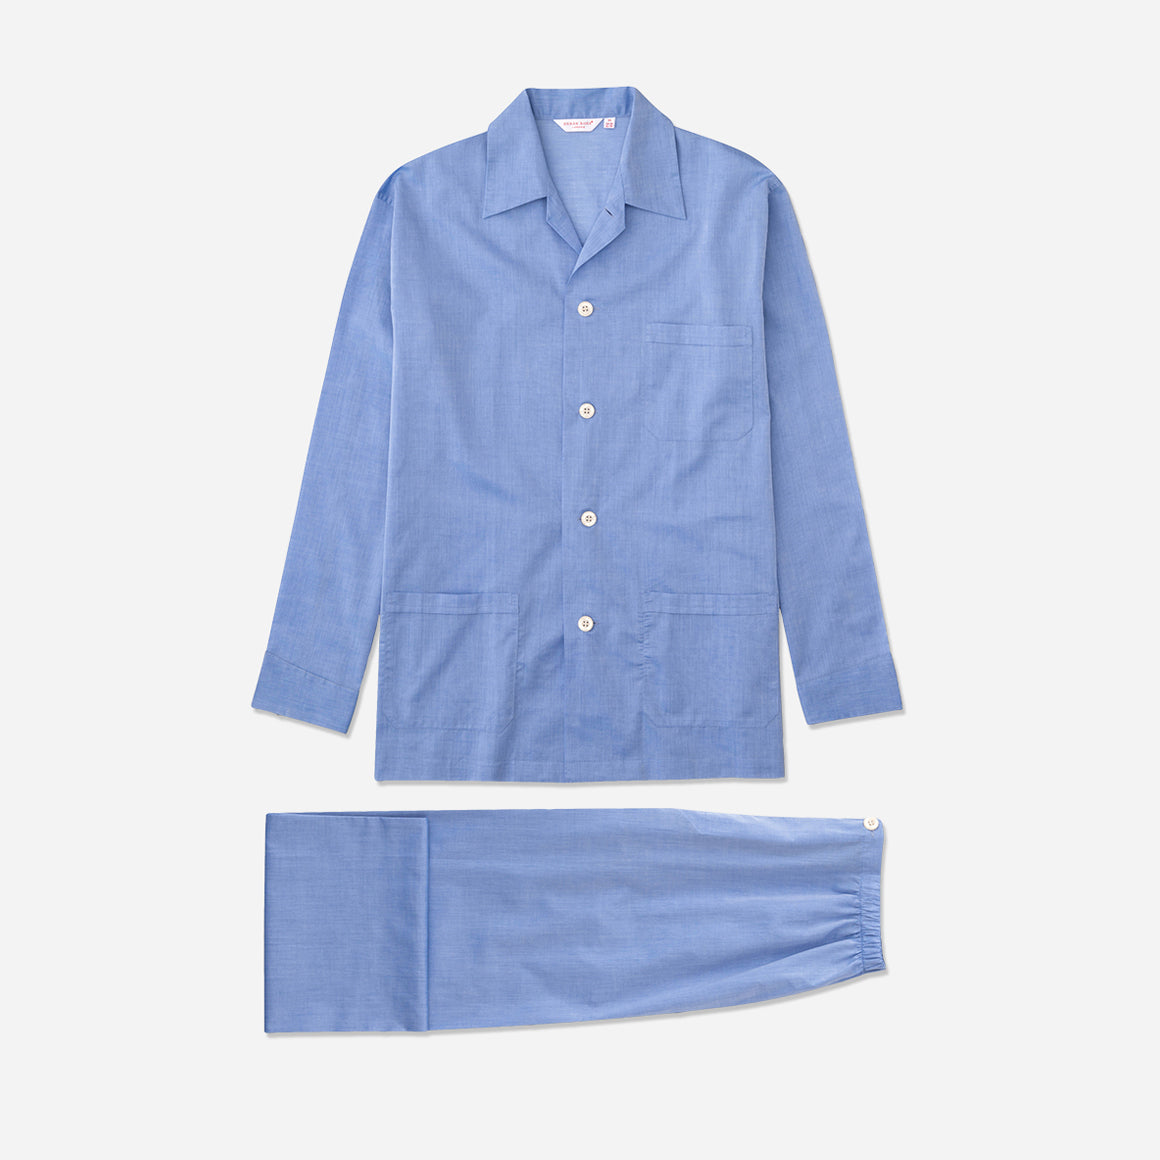 Derek Rose's Amalfi Cotton Classic Fit Pajama Set in a blue colorway. Shown against light grey background.